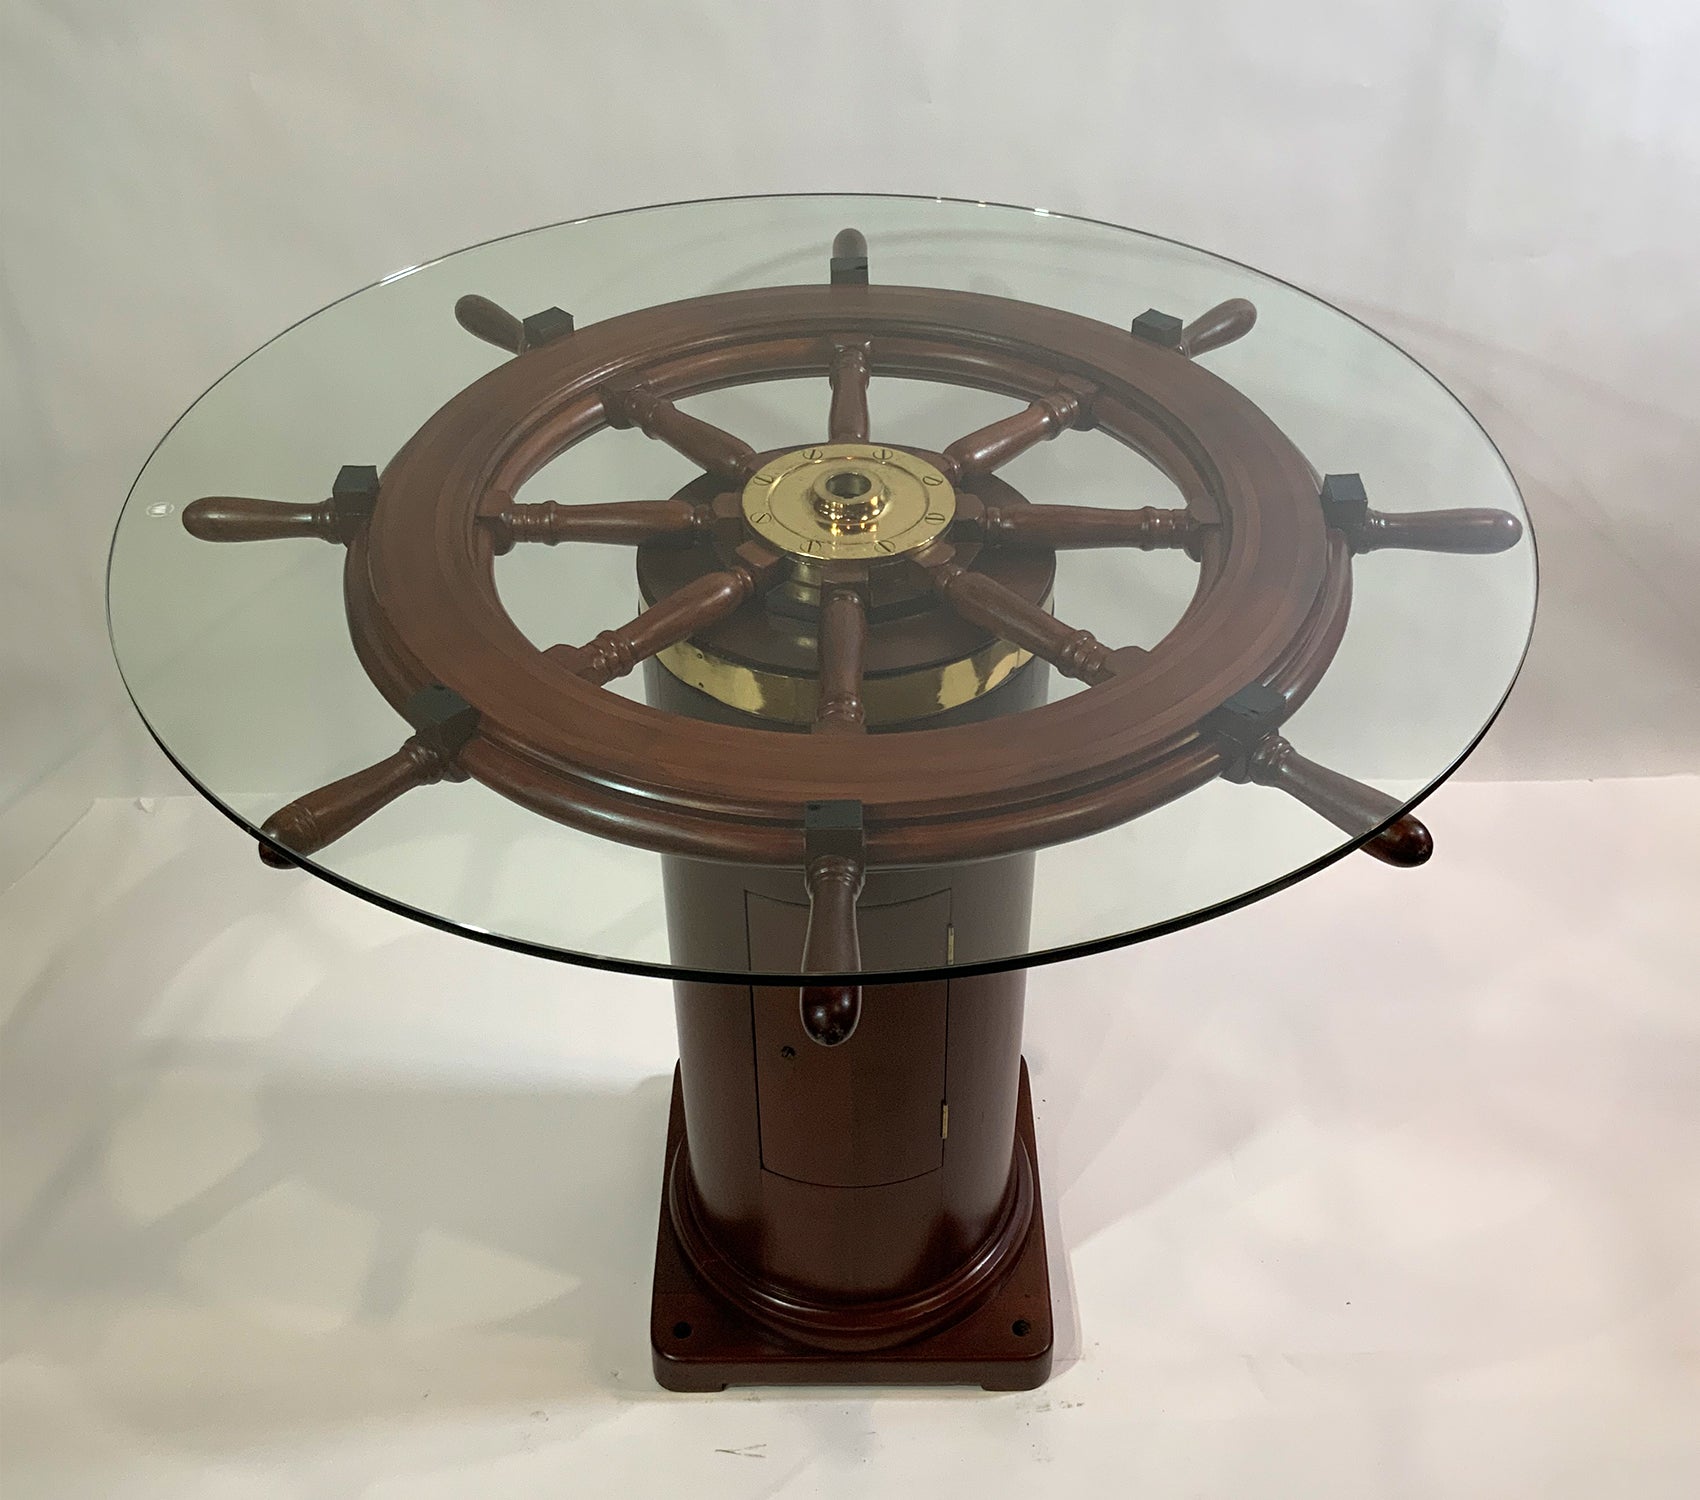 Magnificent Ships Wheel Bistro Table - Lannan Gallery